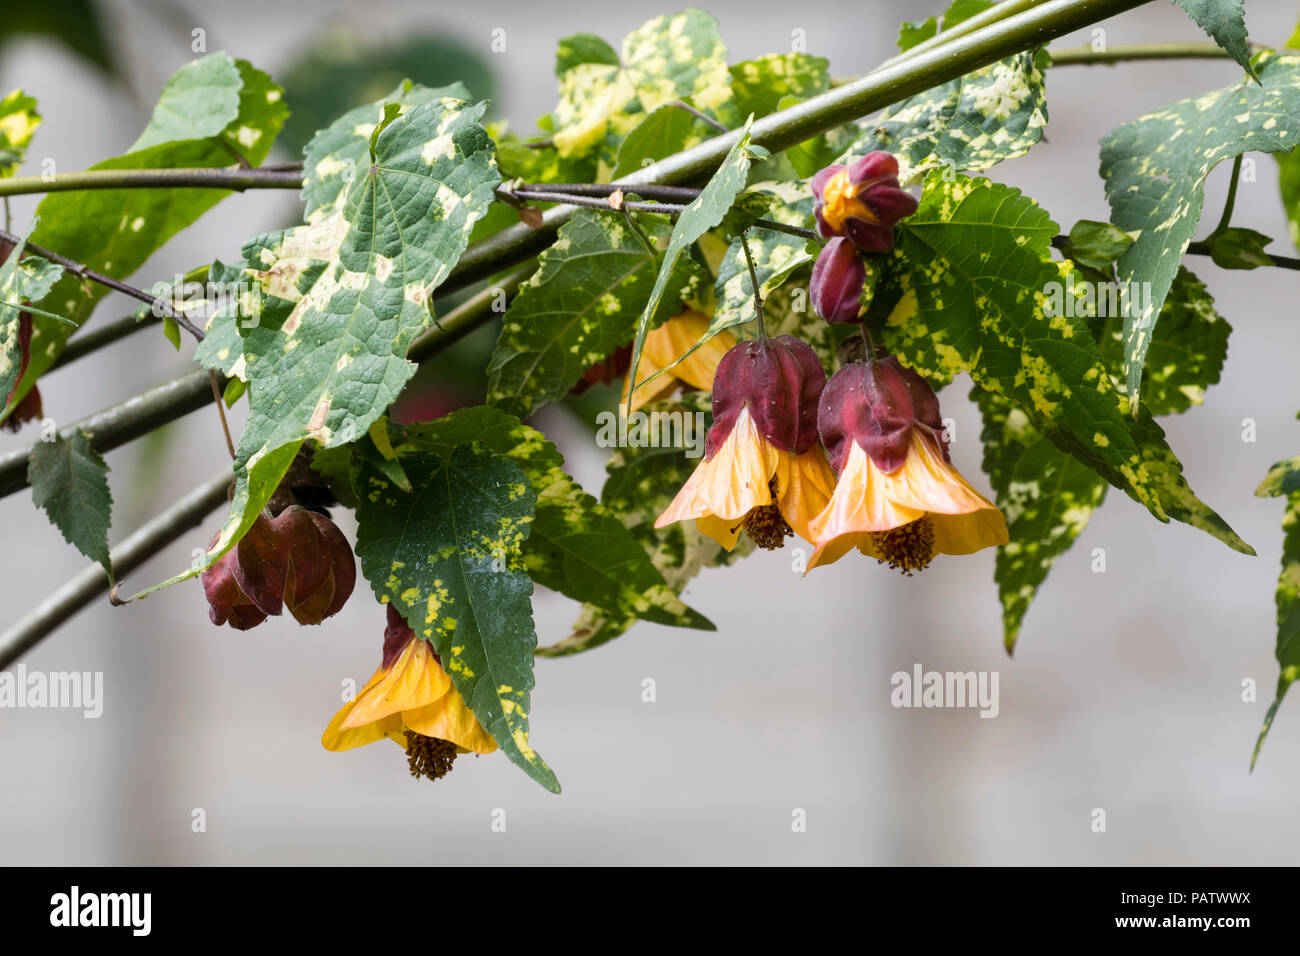 Red and yellow pendant bell flowers and yellow mottle foliage of the frost tender wall shrub Abutilon x milleri 'Variegatum' Stock Photo